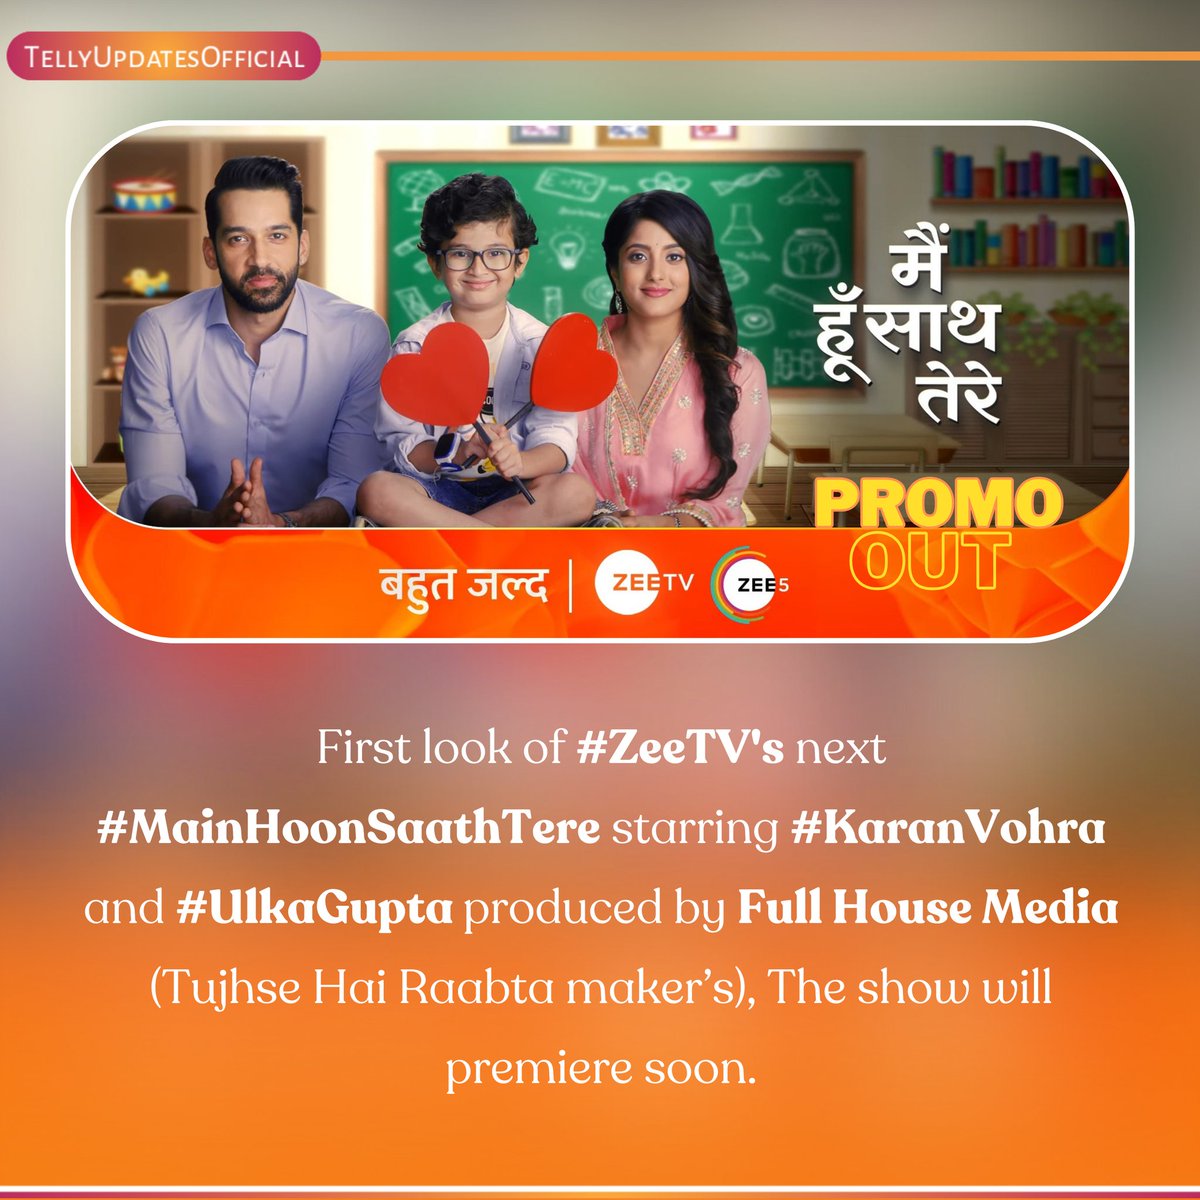 #SuperExclusive EXCLUSIVE NEWS First look of #ZeeTV's next #MainHoonSaathTere starring #KaranVohra and #UlkaGupta produced by Full House Media (Tujhse Hai Raabta maker’s), The show will premiere soon. #NewShow #Zee #PromoOut